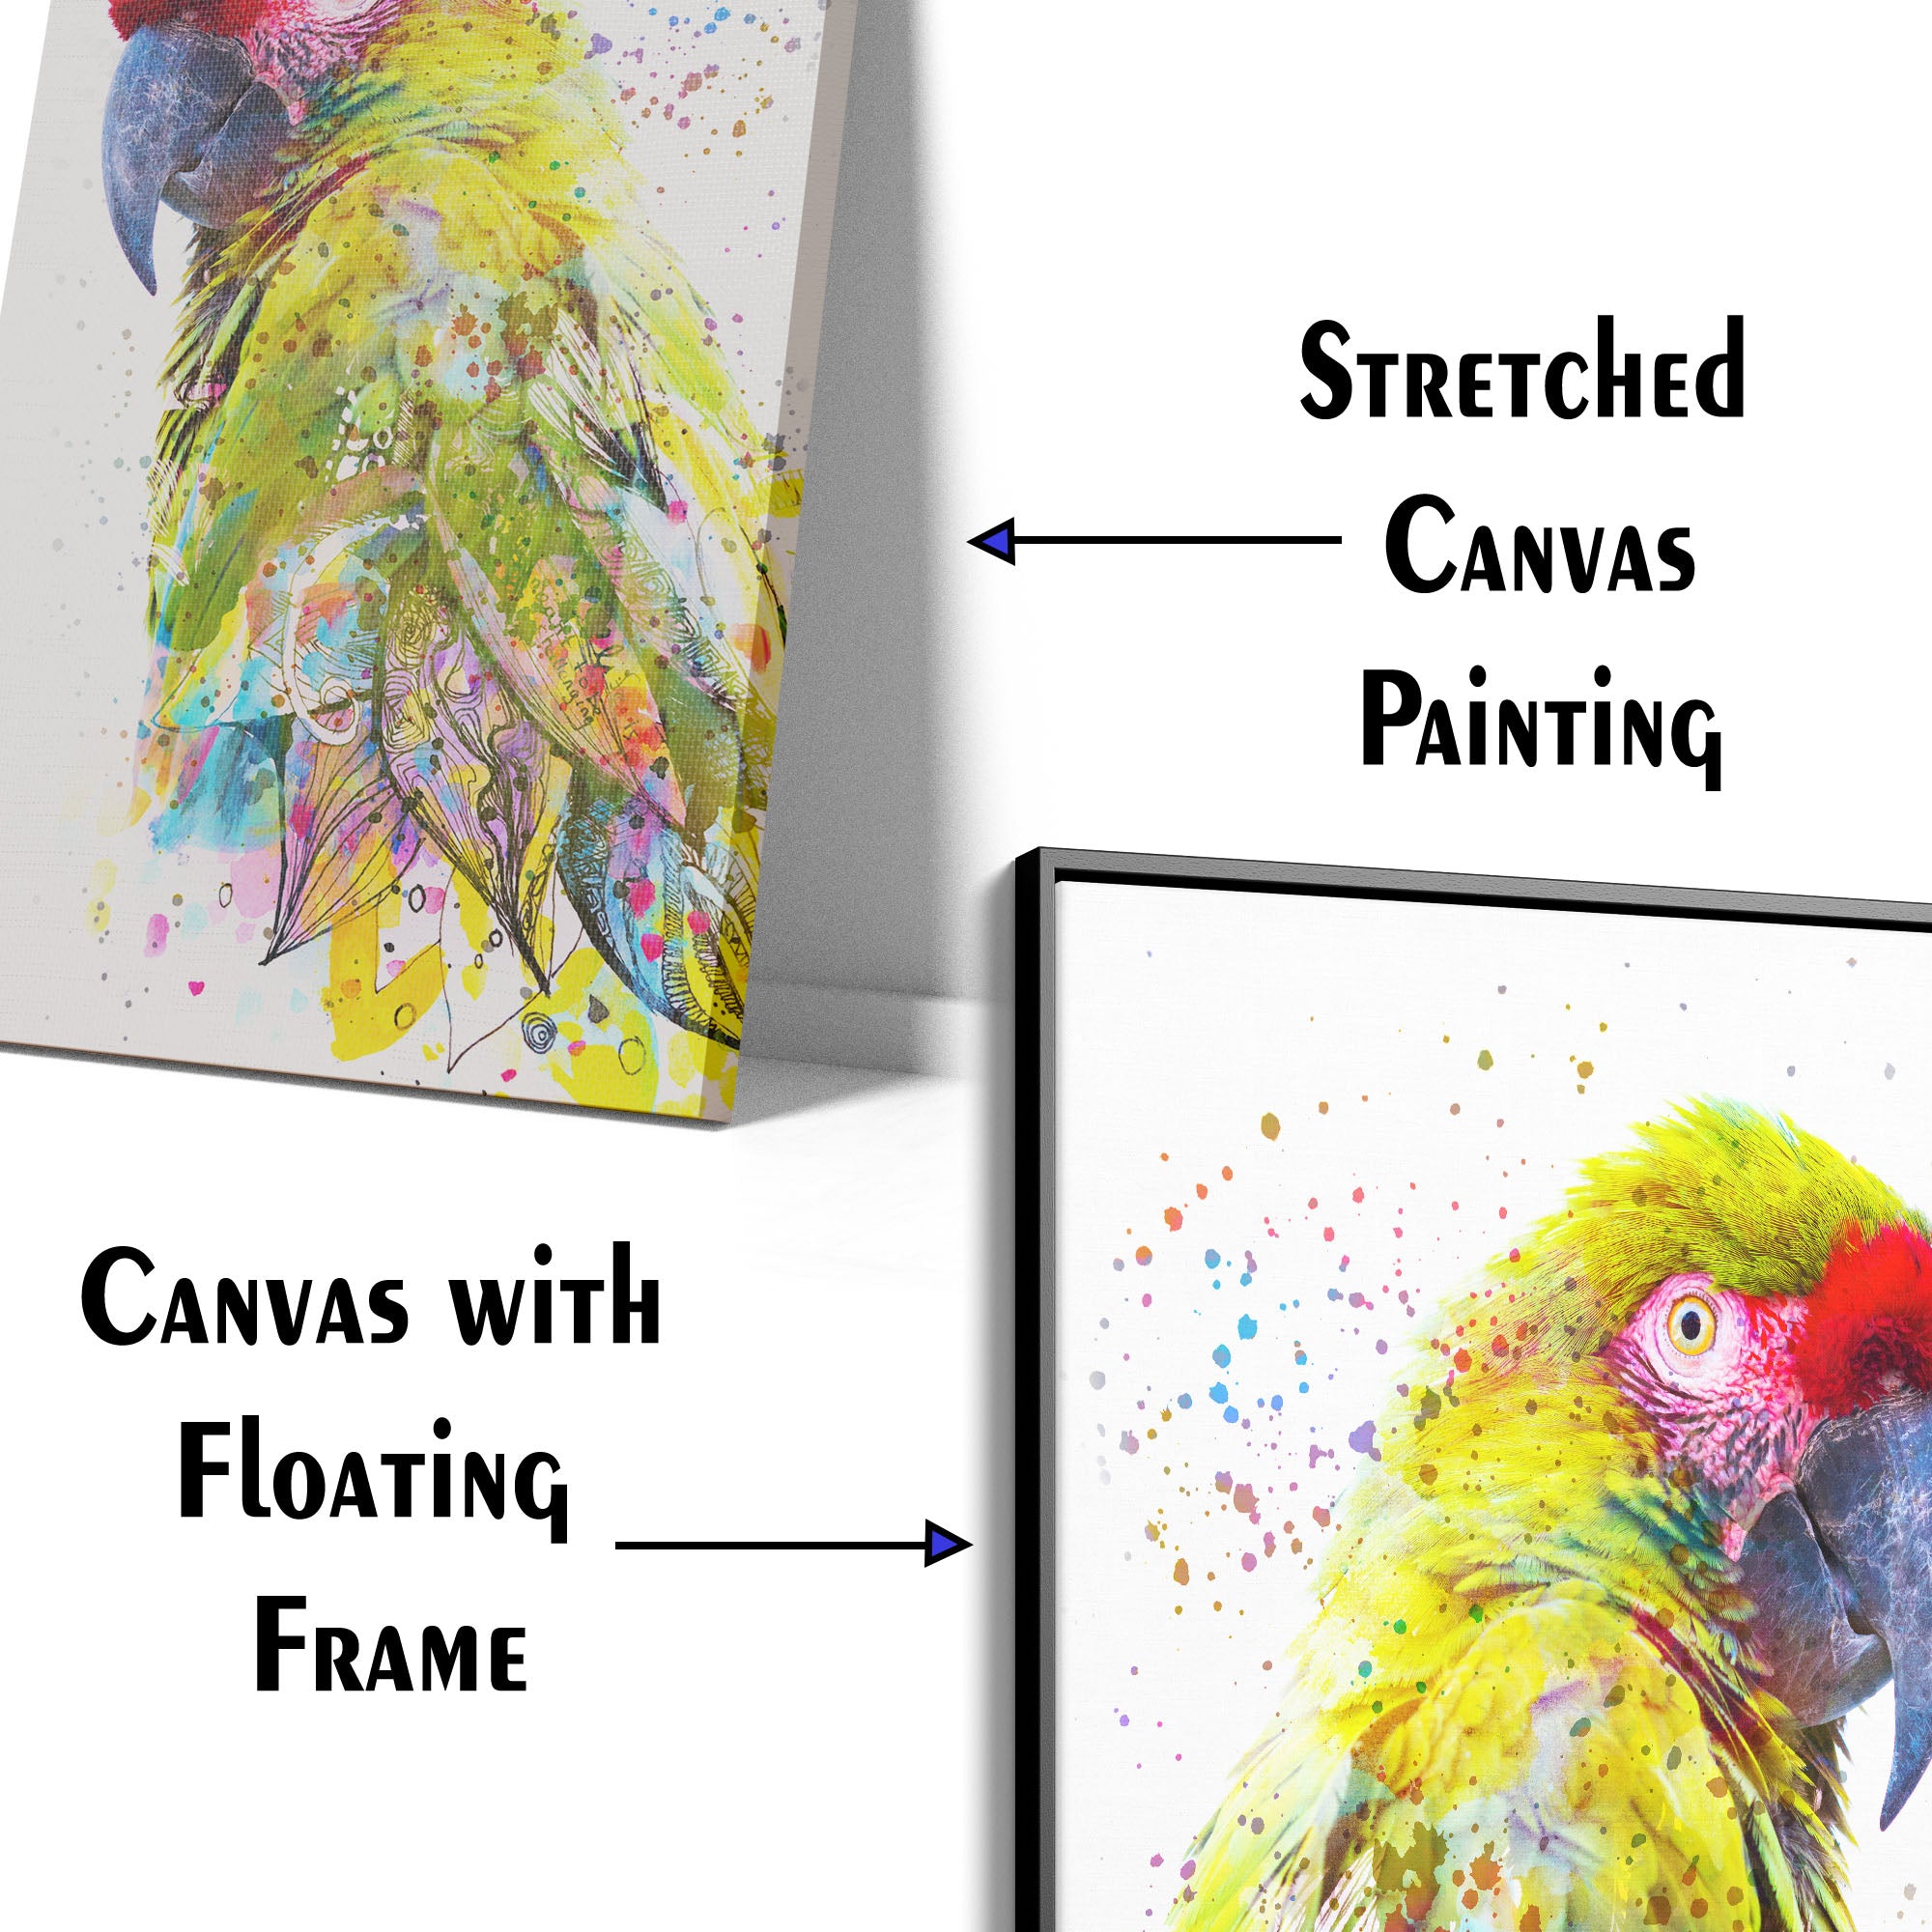 Colourful Parrot Wall Art Canvas Wall Painting